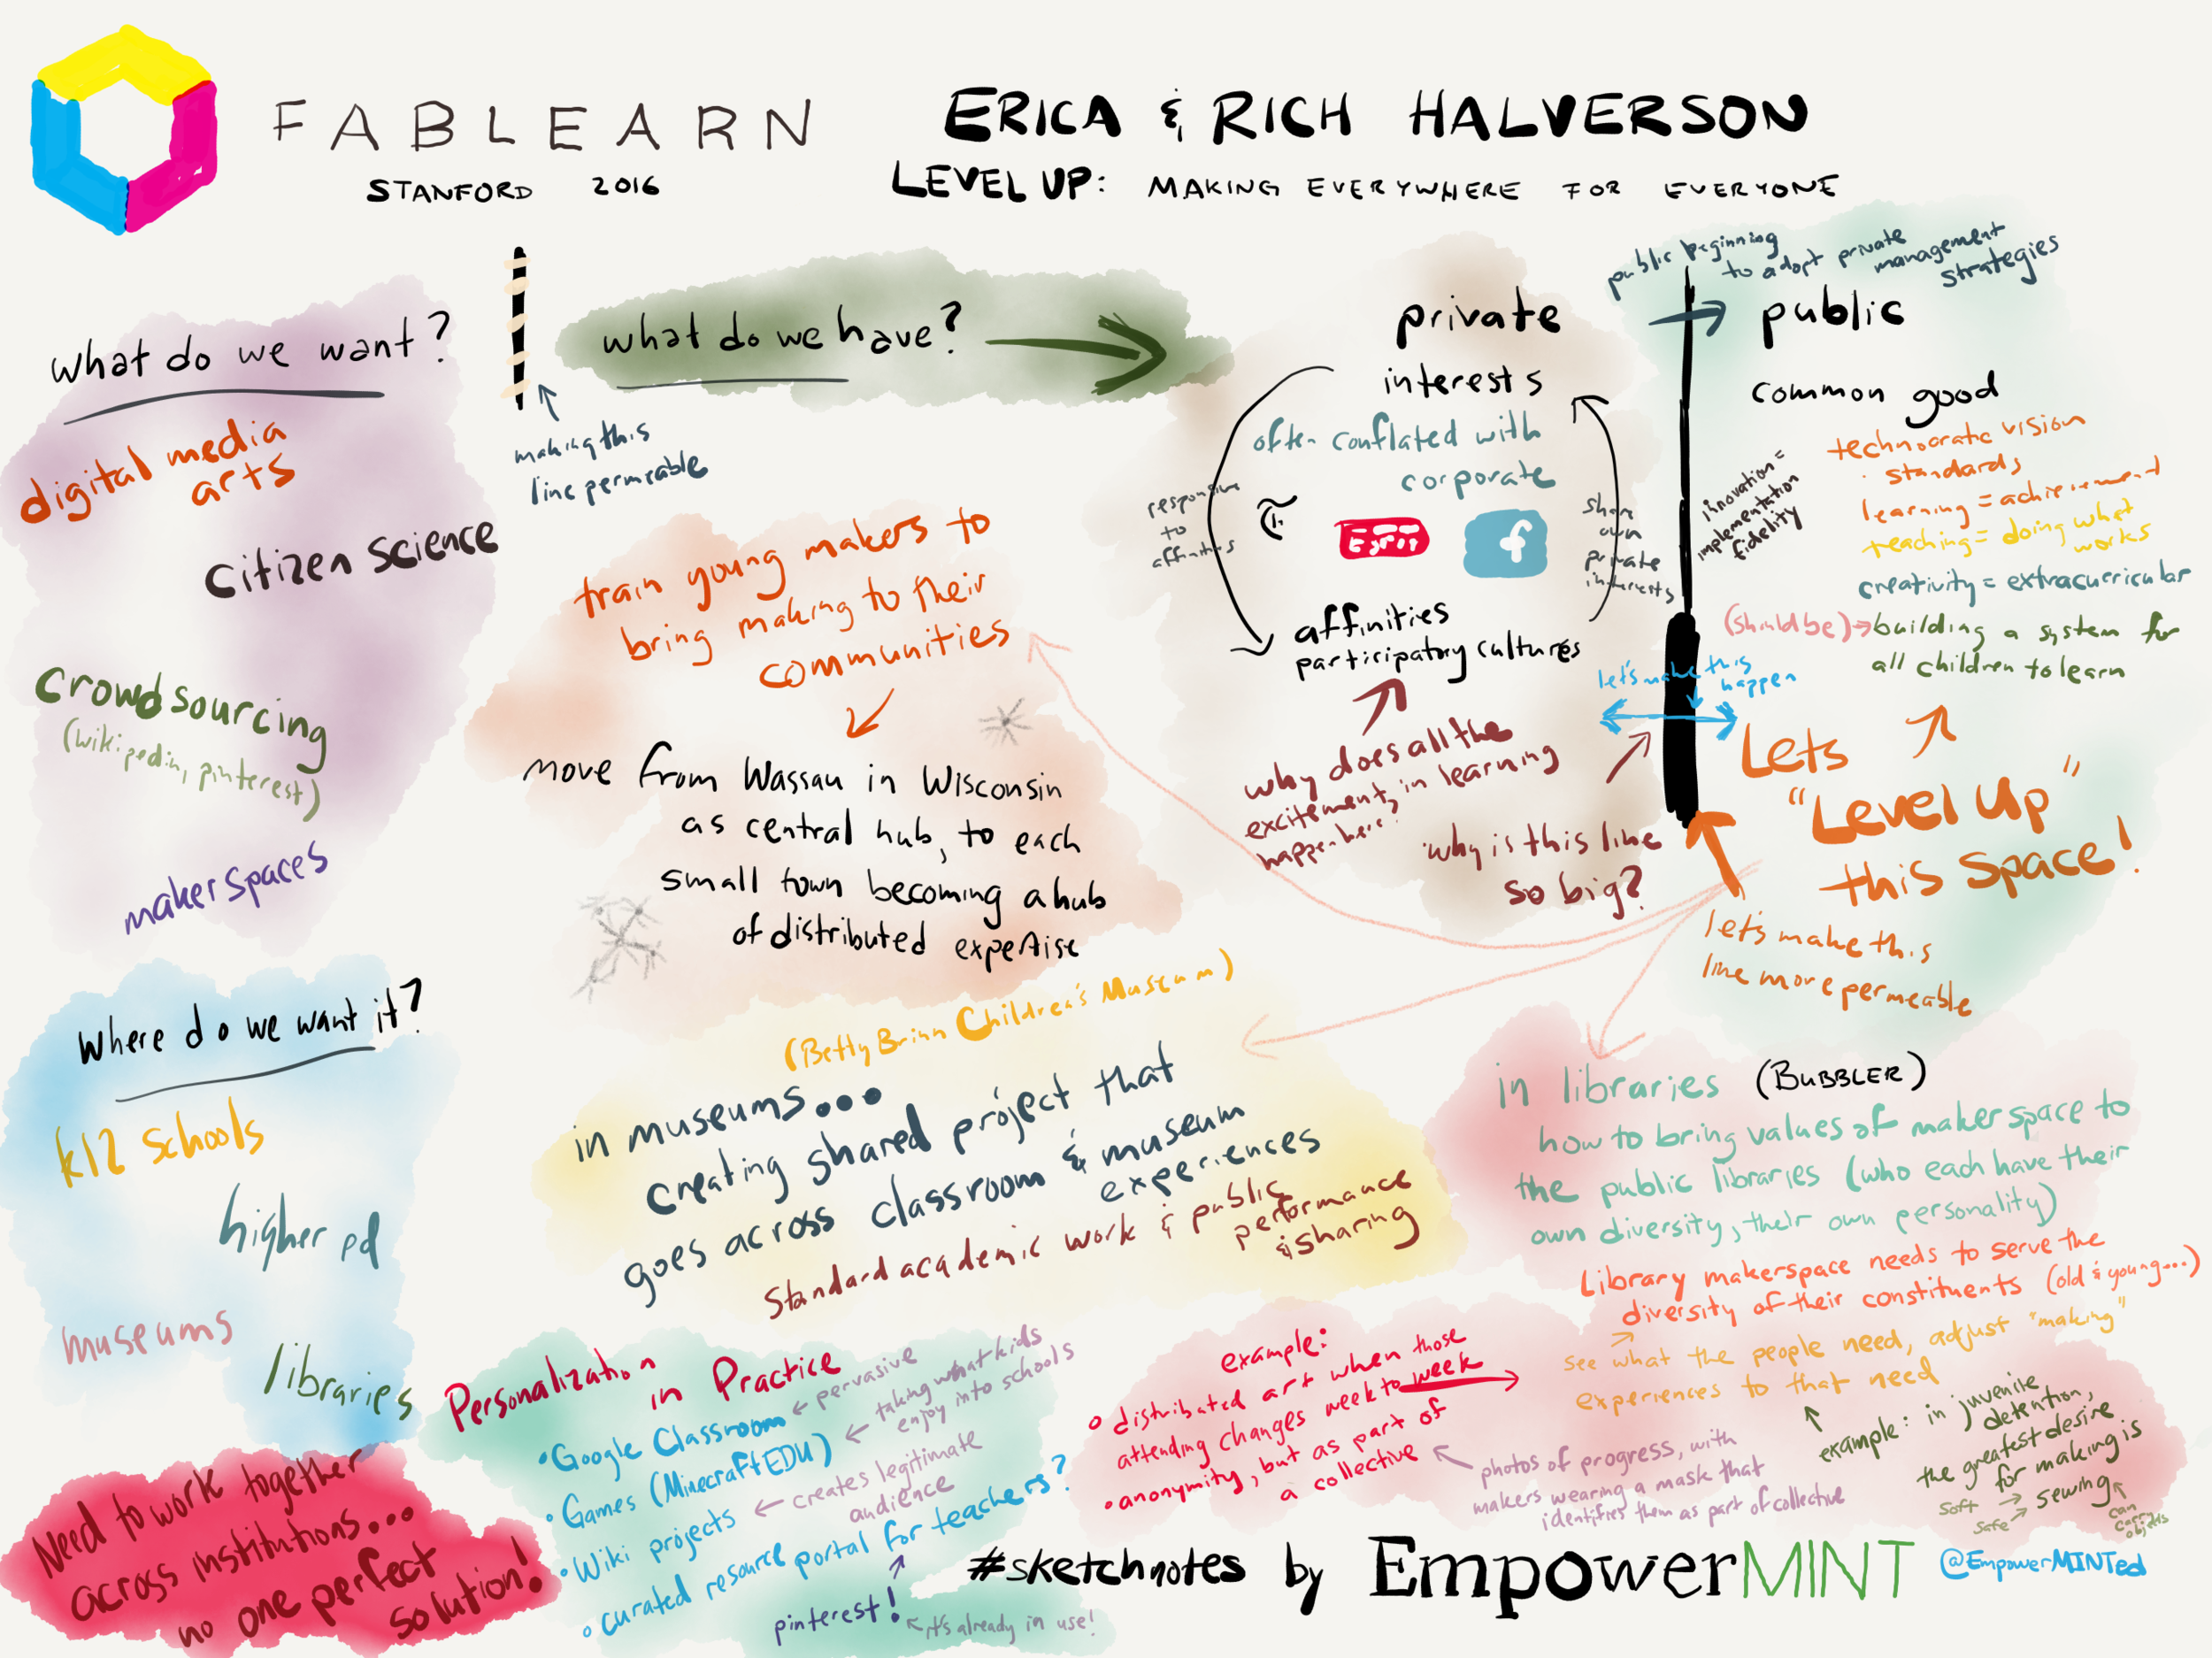 Erica_and_Rich_Halverson_FabLearn.PNG